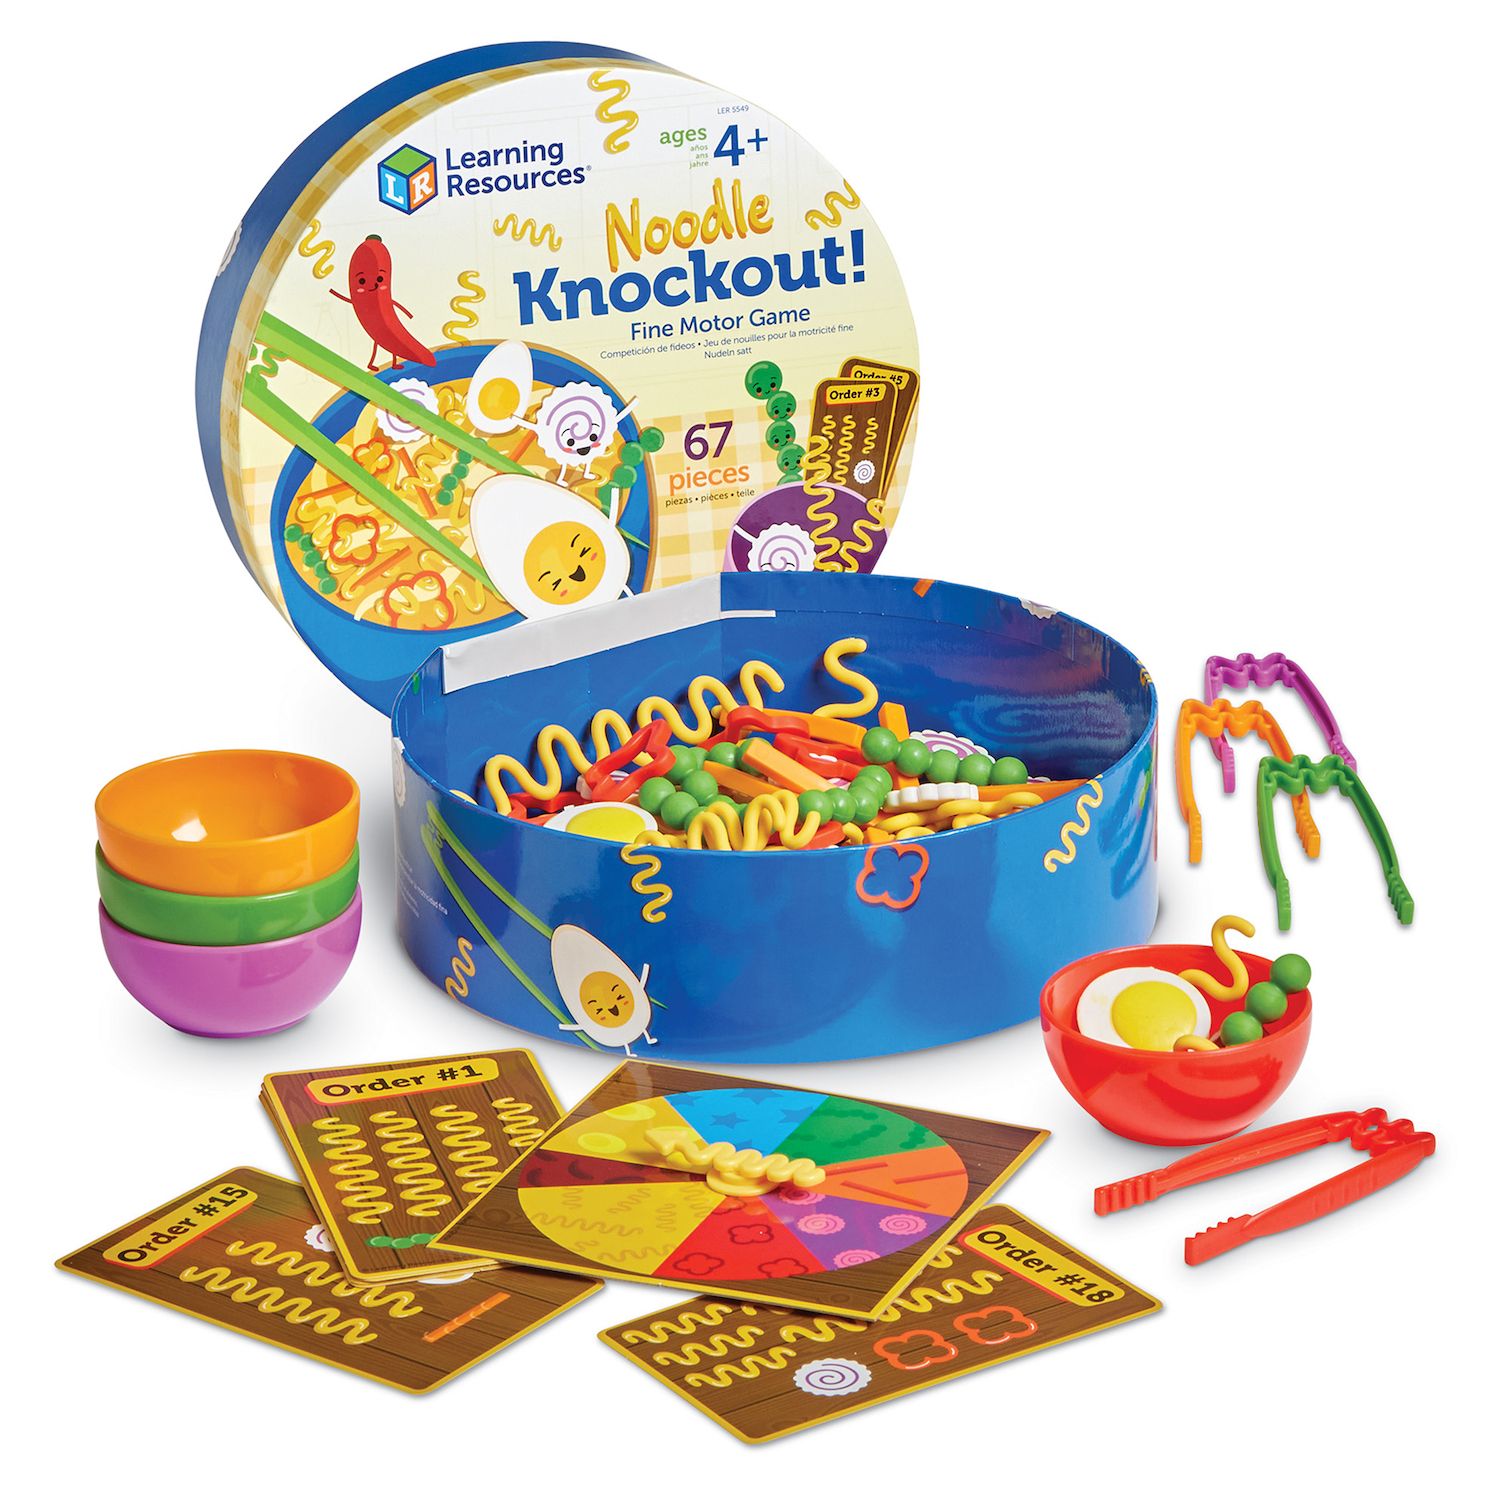 Image for Learning Resources Noodle Knockout Fine Motor Game at Kohl's.